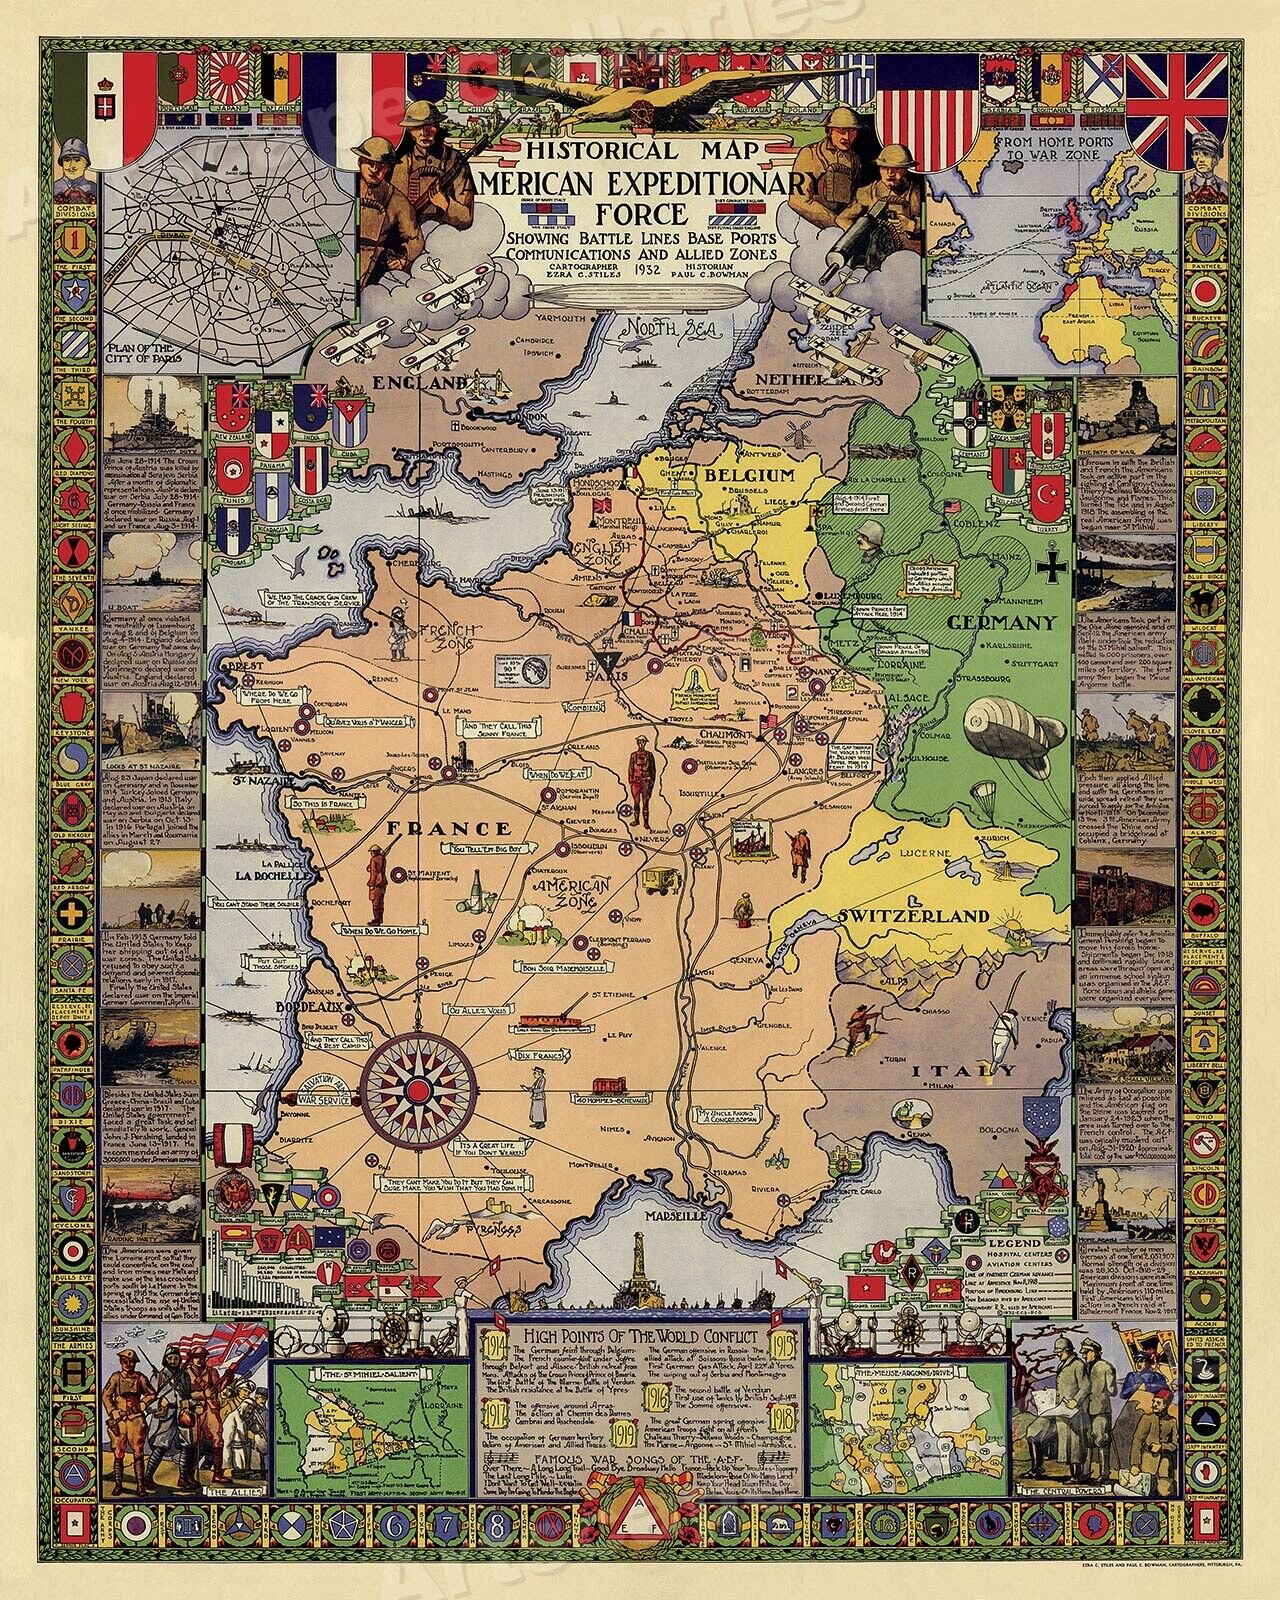 Historical Battle Map of World War I - 1932 Vintage Style Conflict Map - 24x30